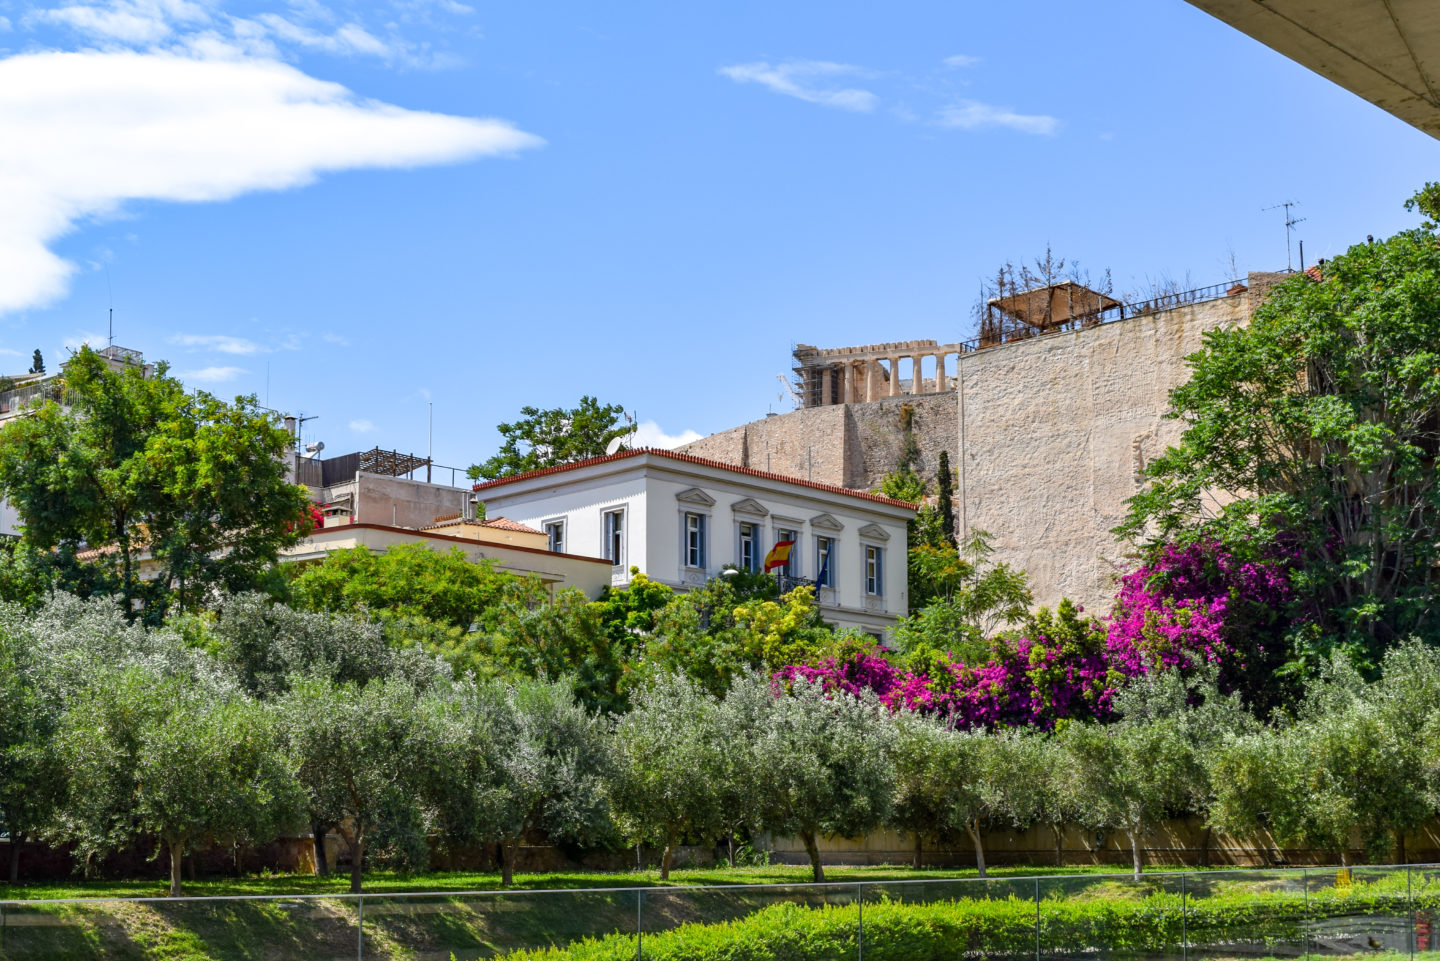 The ultimate guide to Athens by a local - The Athenian Girl Blog